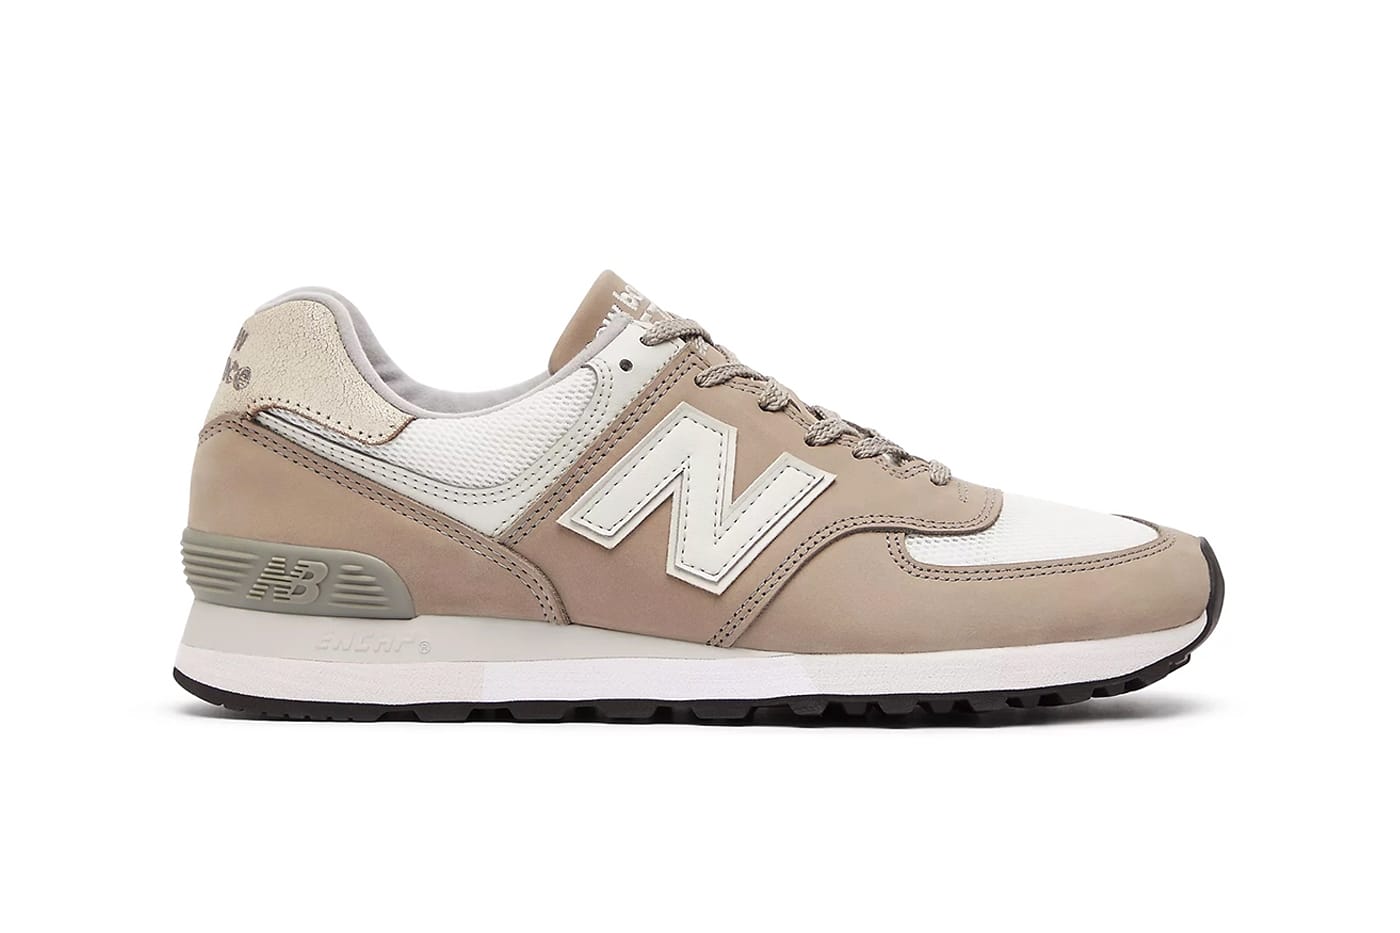 New Balance 576 Made in UK Returns in 